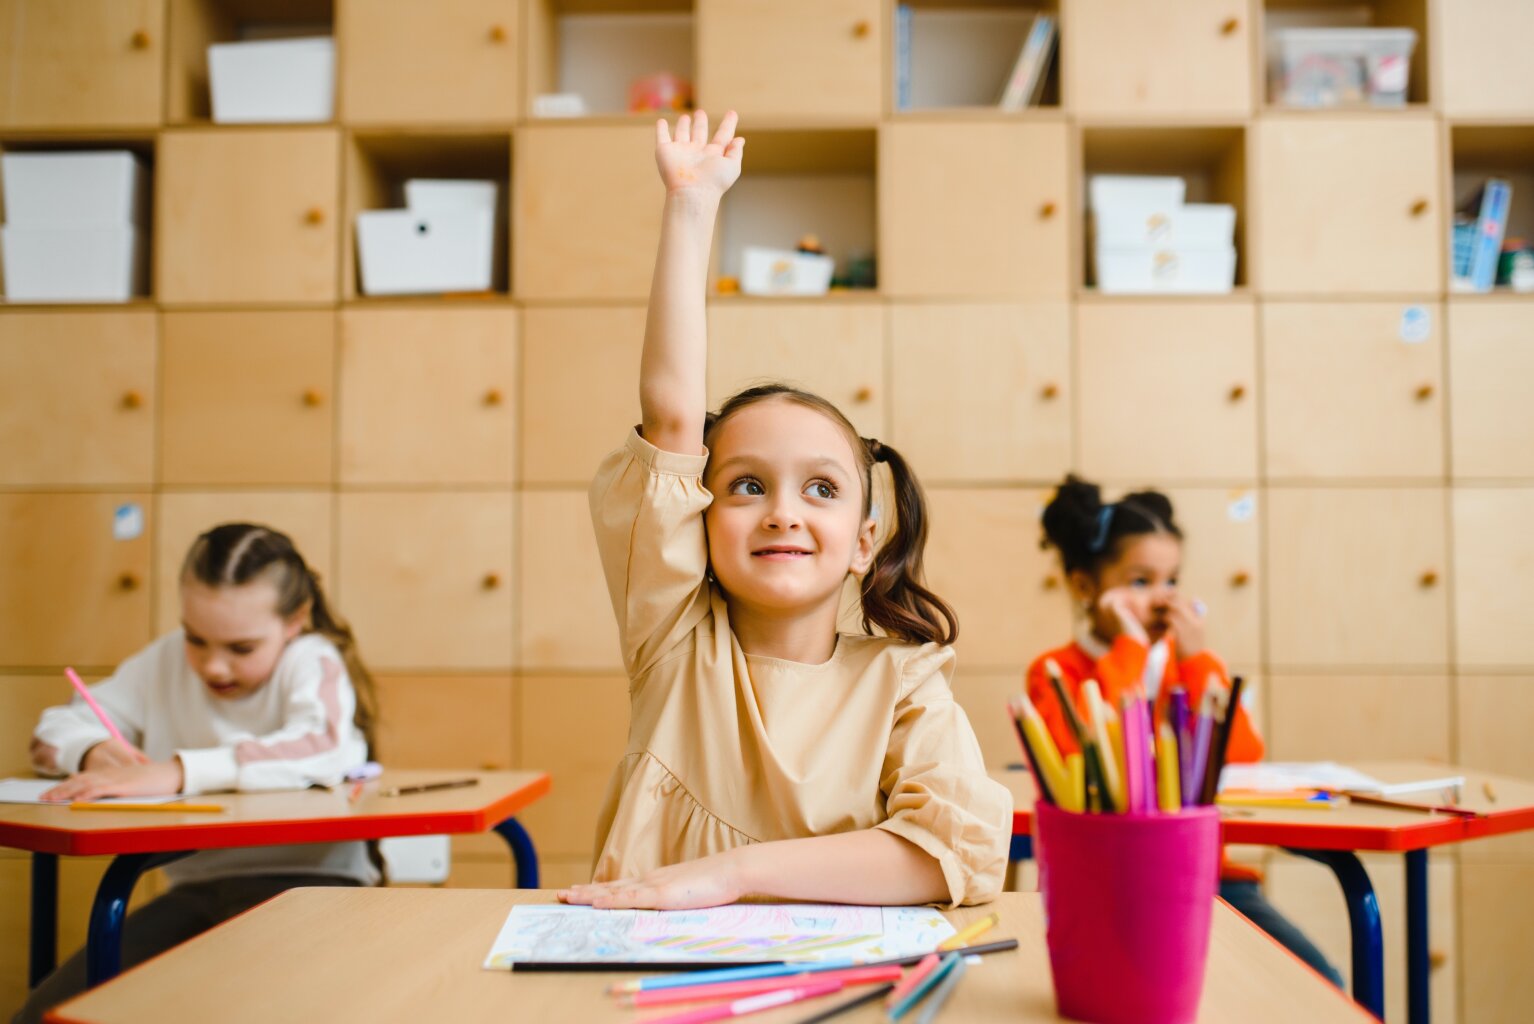 A young girl raising her hand in class with her school supplies spread out around her.